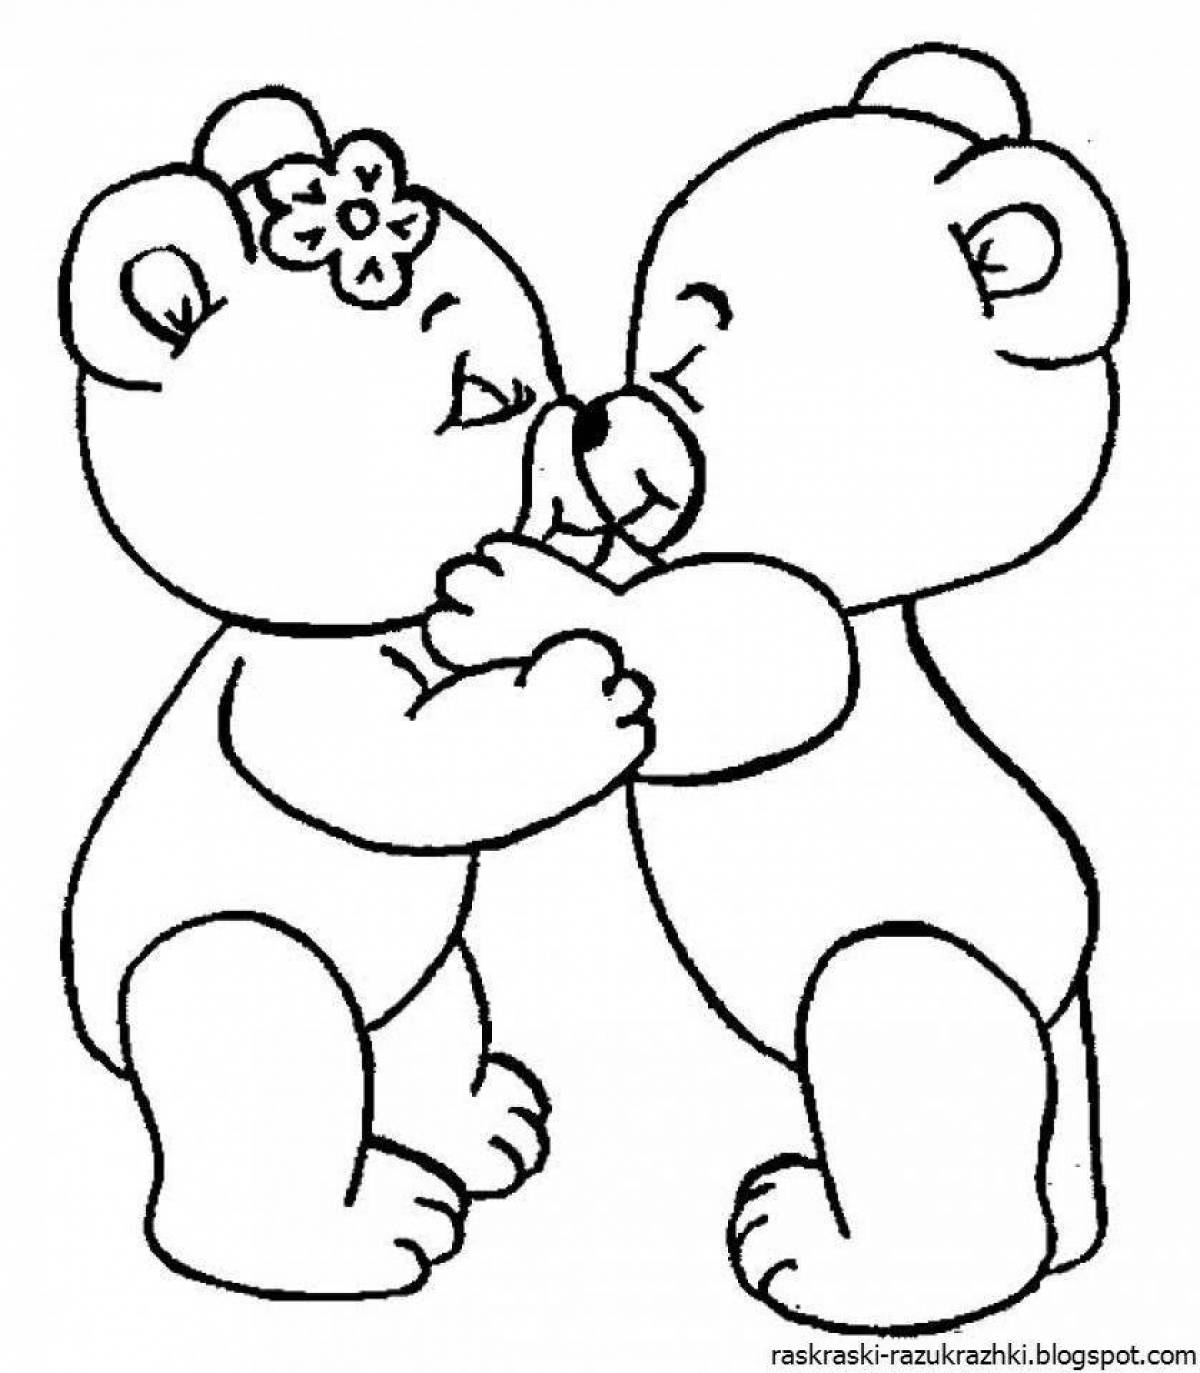 Hug day coloring page for kids